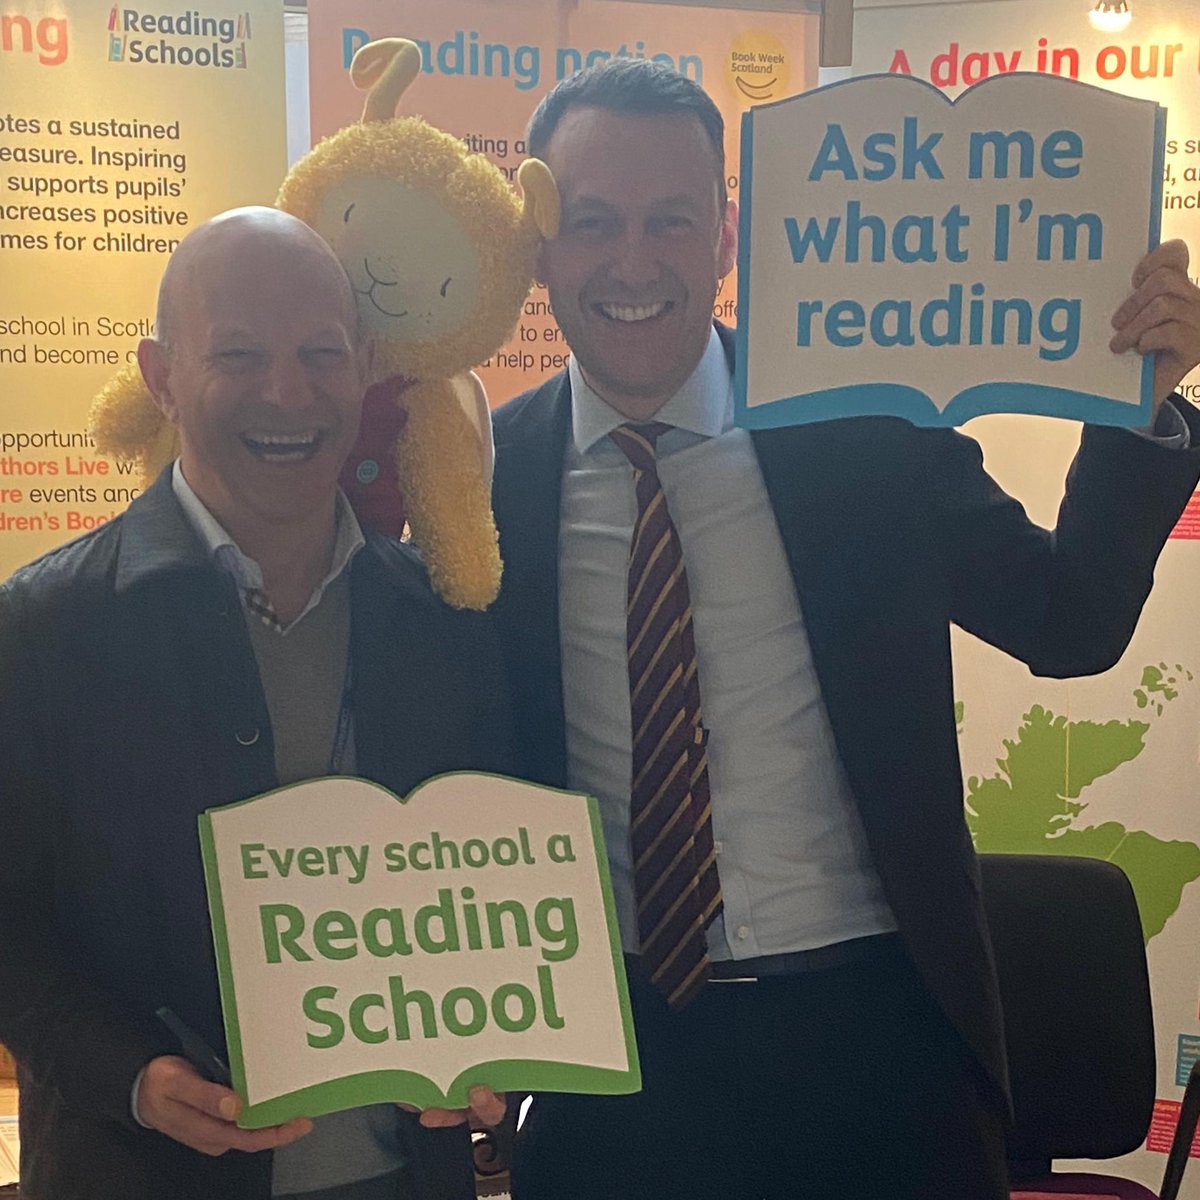 In parliament this week I learned about fish🐟and books📚 (but not together). 🐟pic - Happy to sign @sff_uk pledge promoting Scotland’s vibrant fishing industry. #PrideInTheSeas 📚pic - And to support the fantastic @scottishbktrust campaign #EverySchoolAReadingSchool.